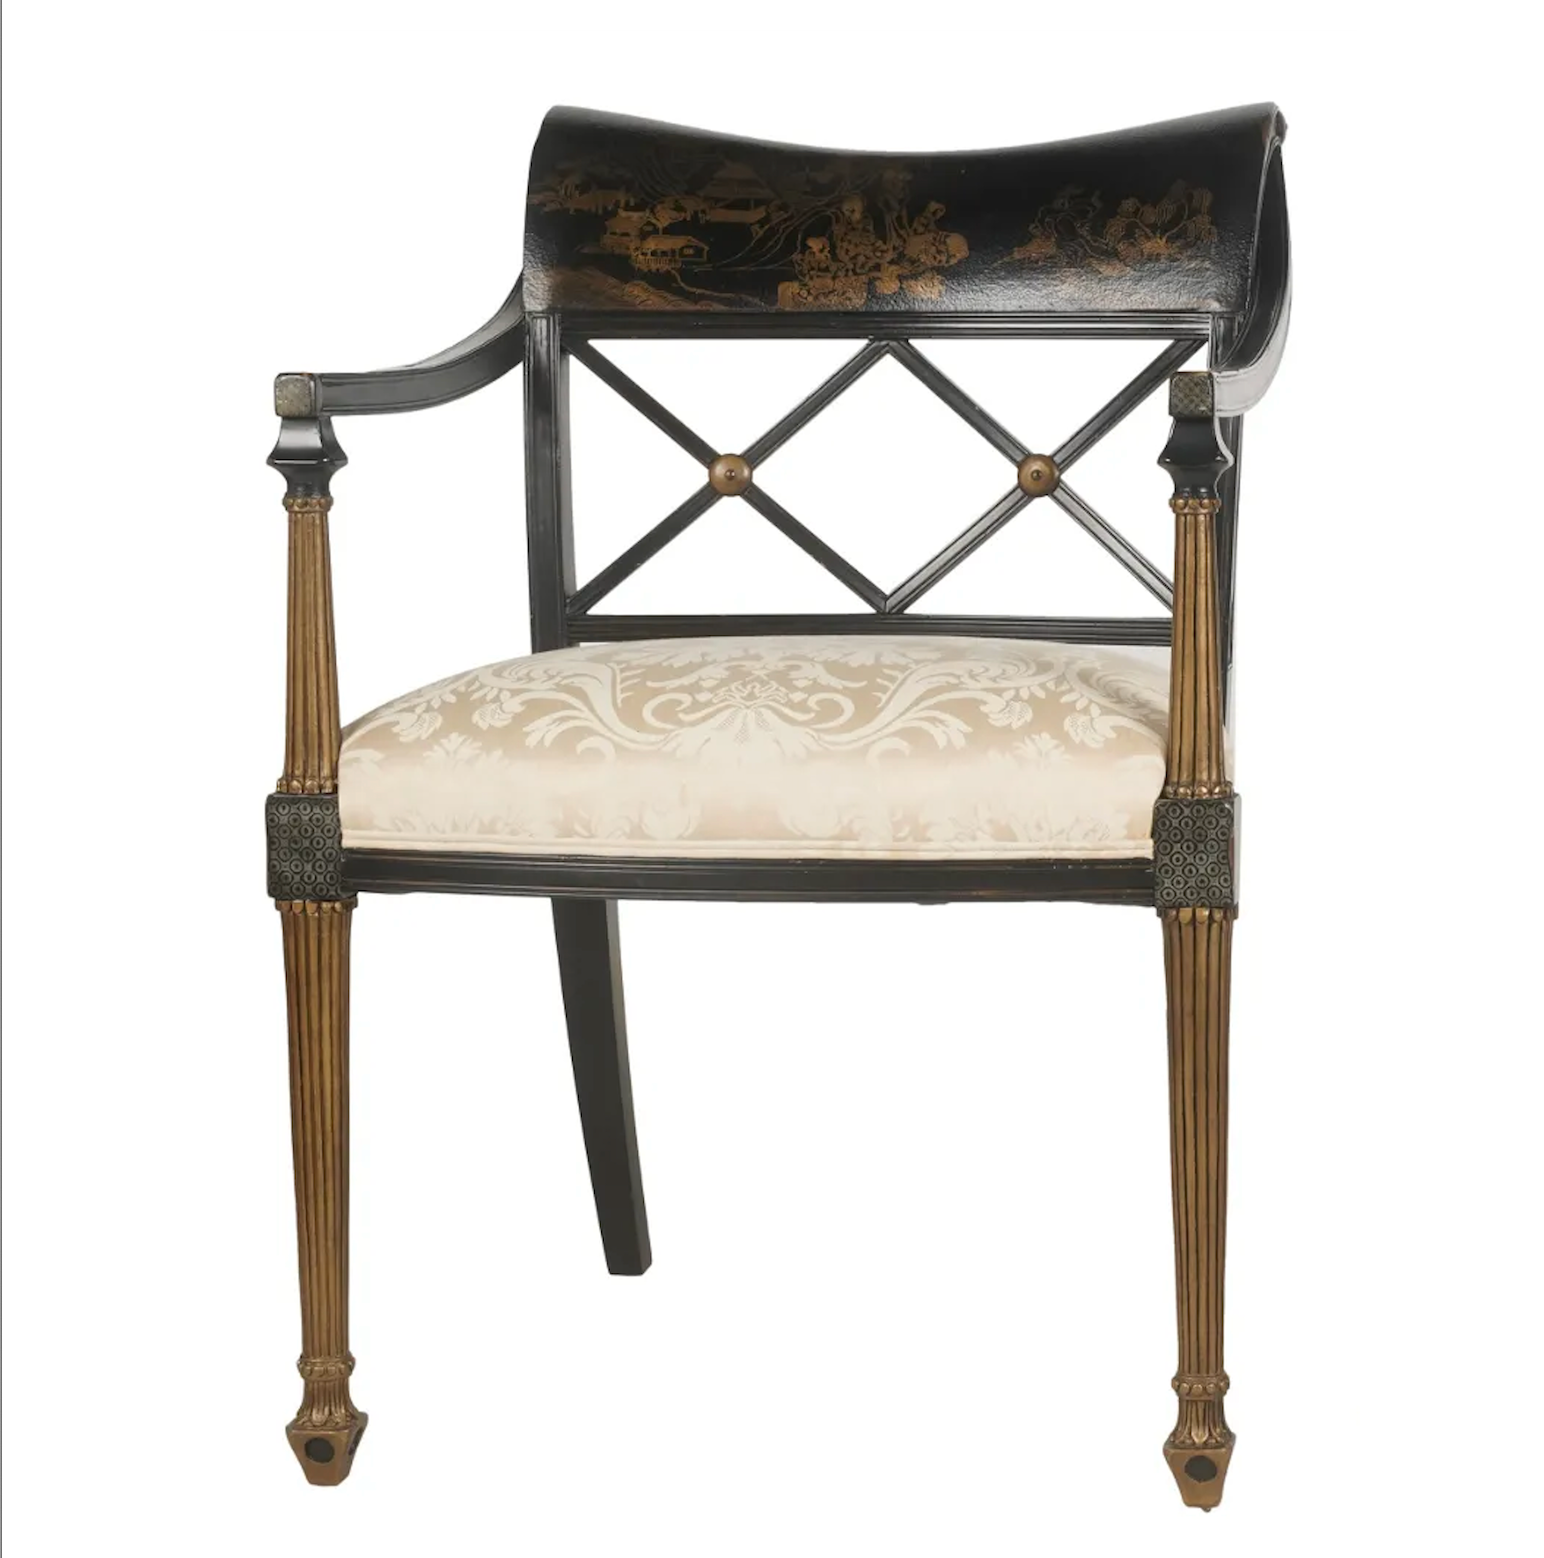 AF2-046: Antique Late 20th Century English Regency Style Chinoiserie Arm Chair